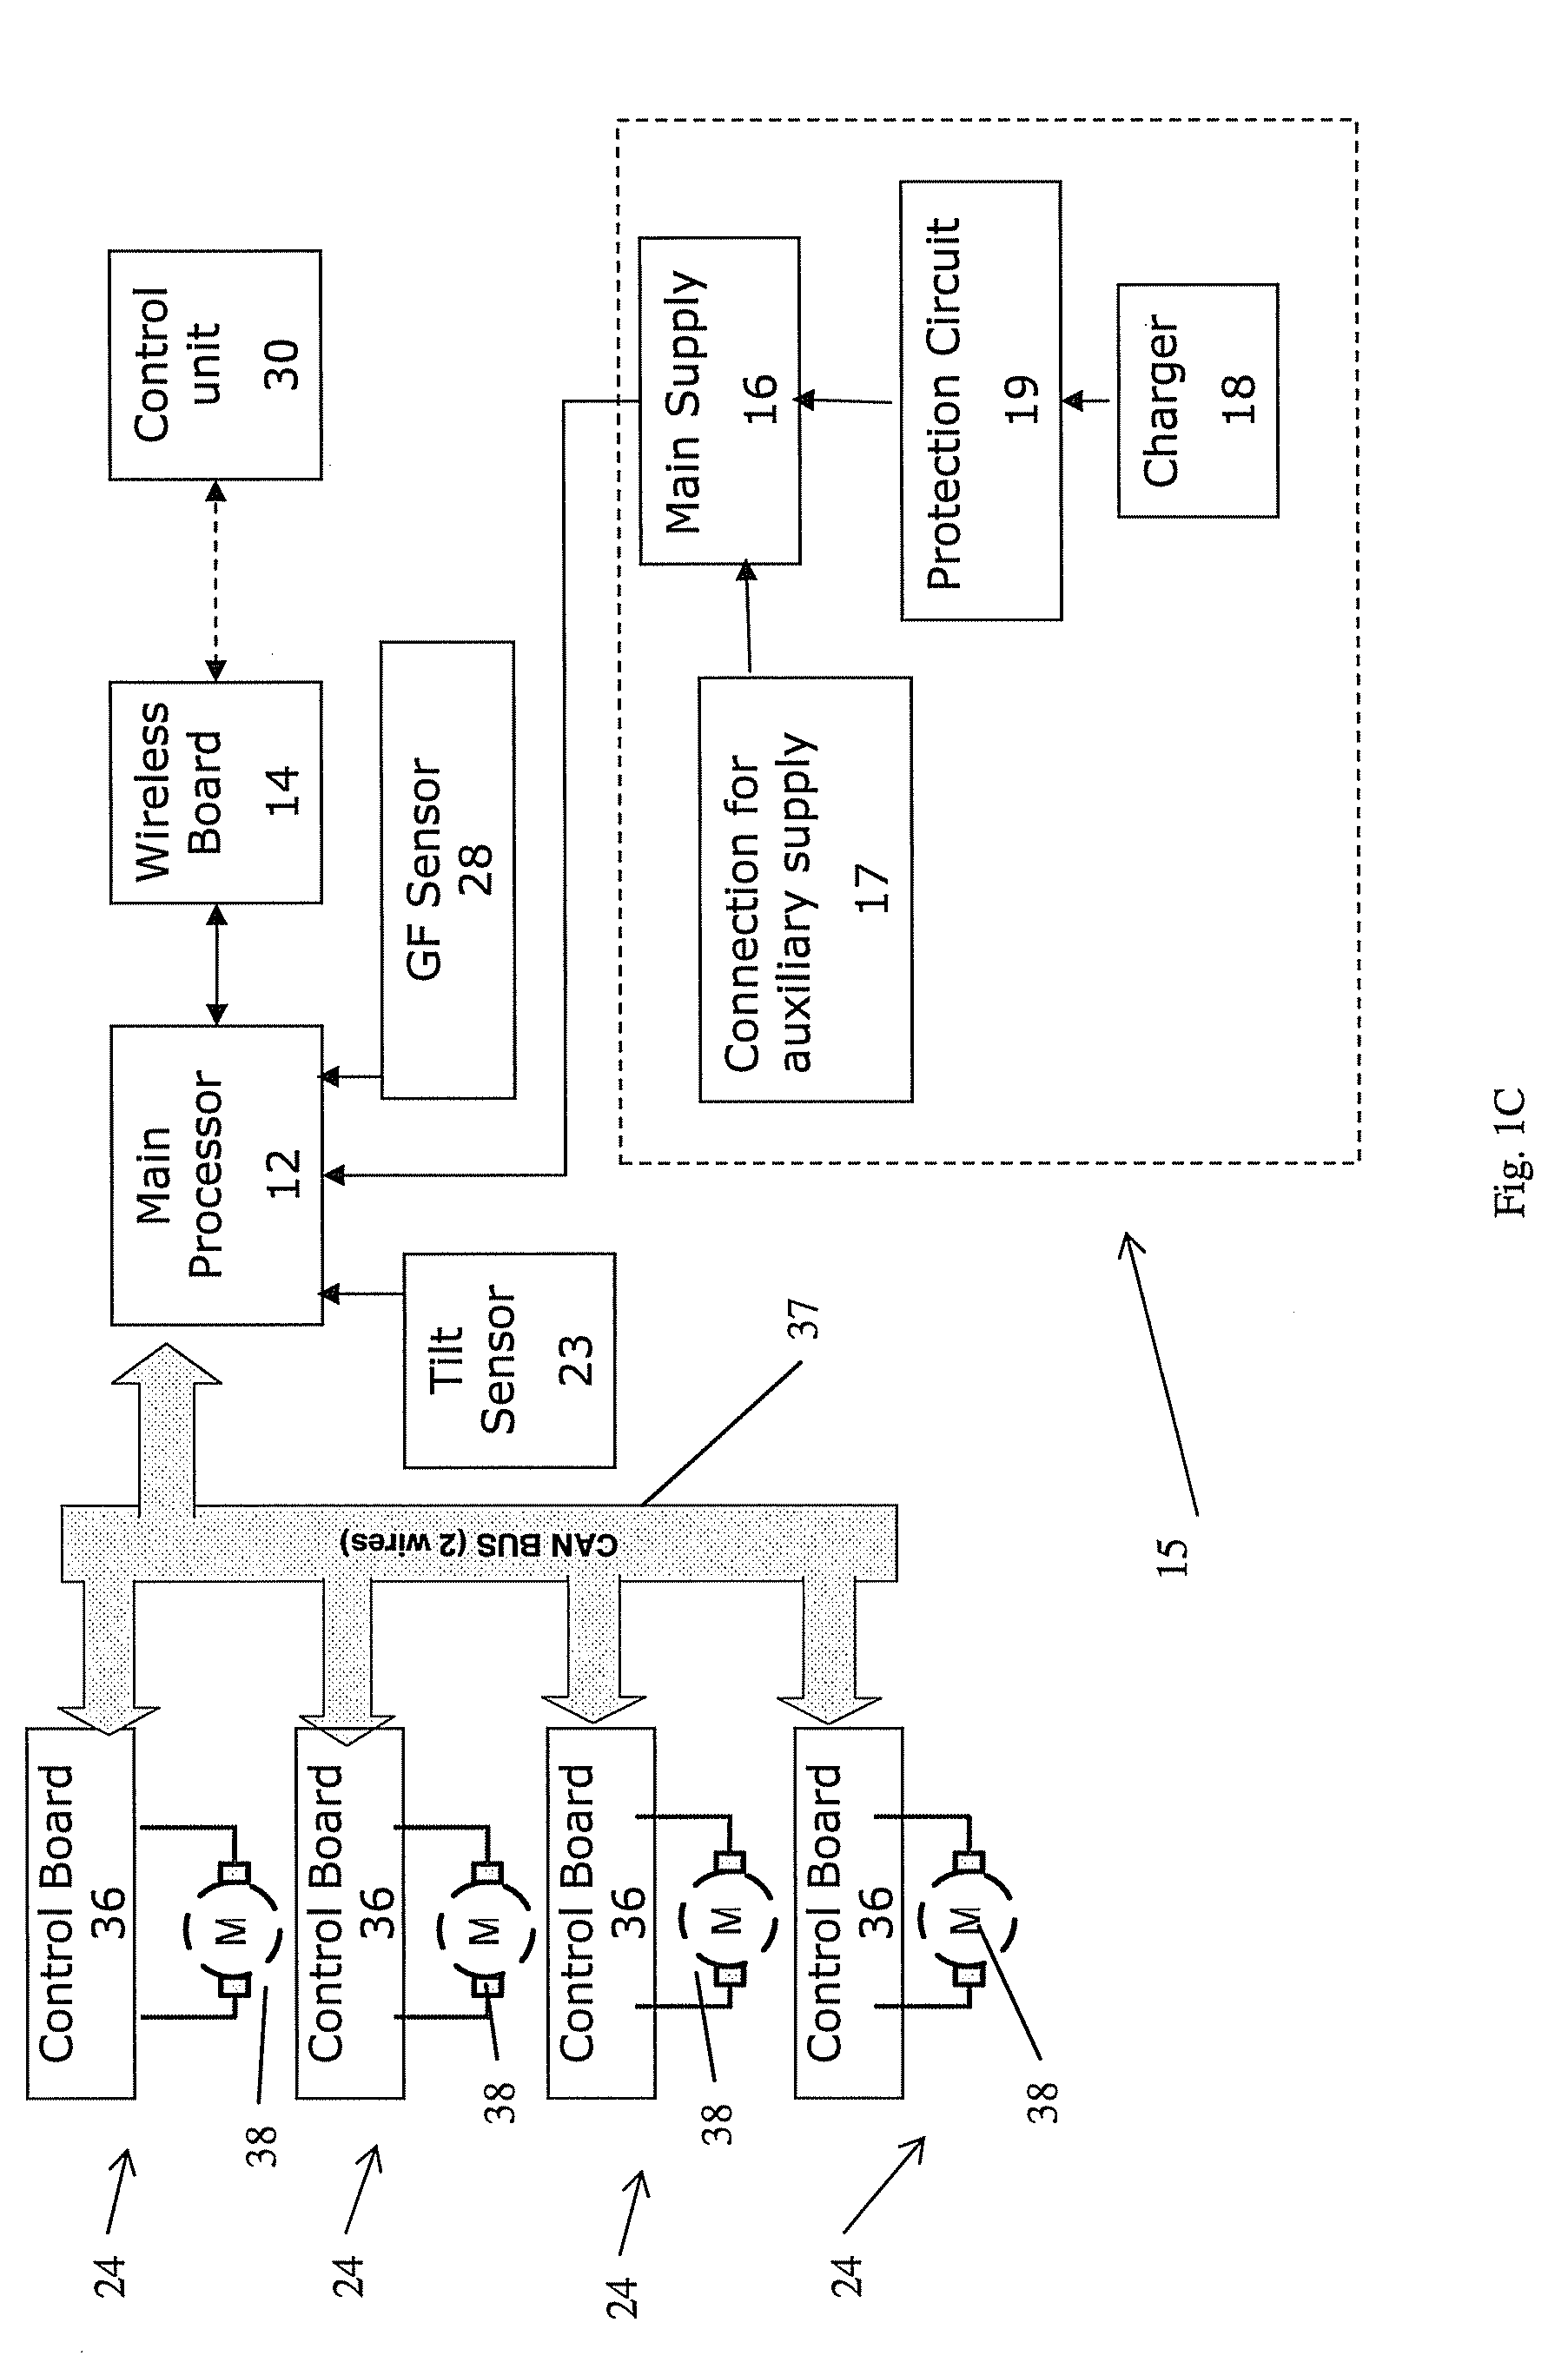 Locomotion assisting device and method